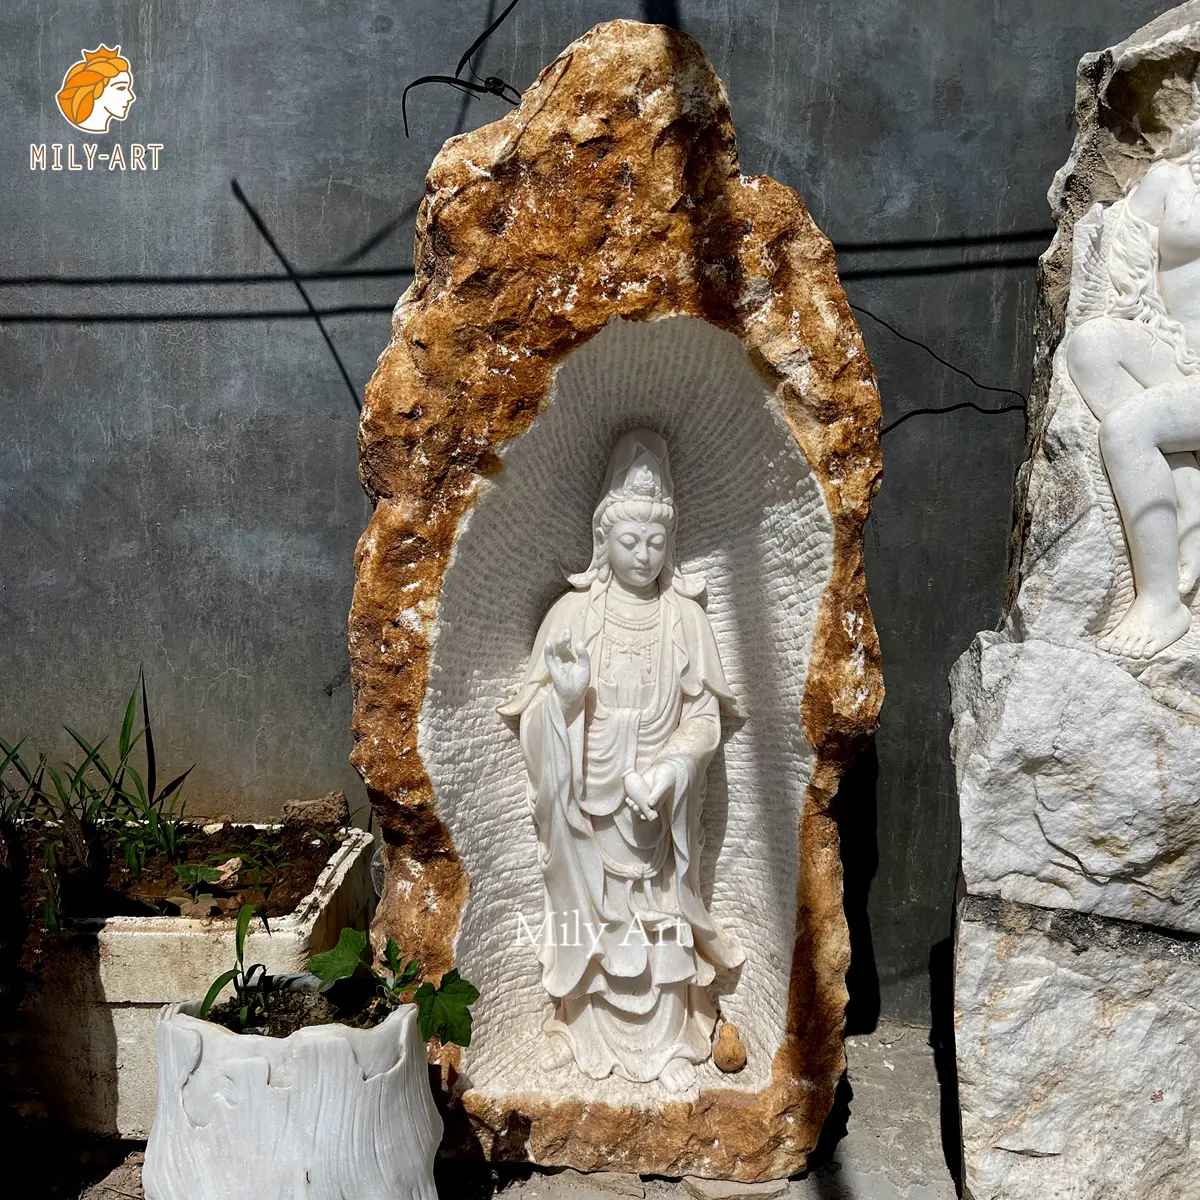 Life Size Hand Carved Natural Stone Carving Rough Marble Guanyin Bodhisattva Statue Sculpture